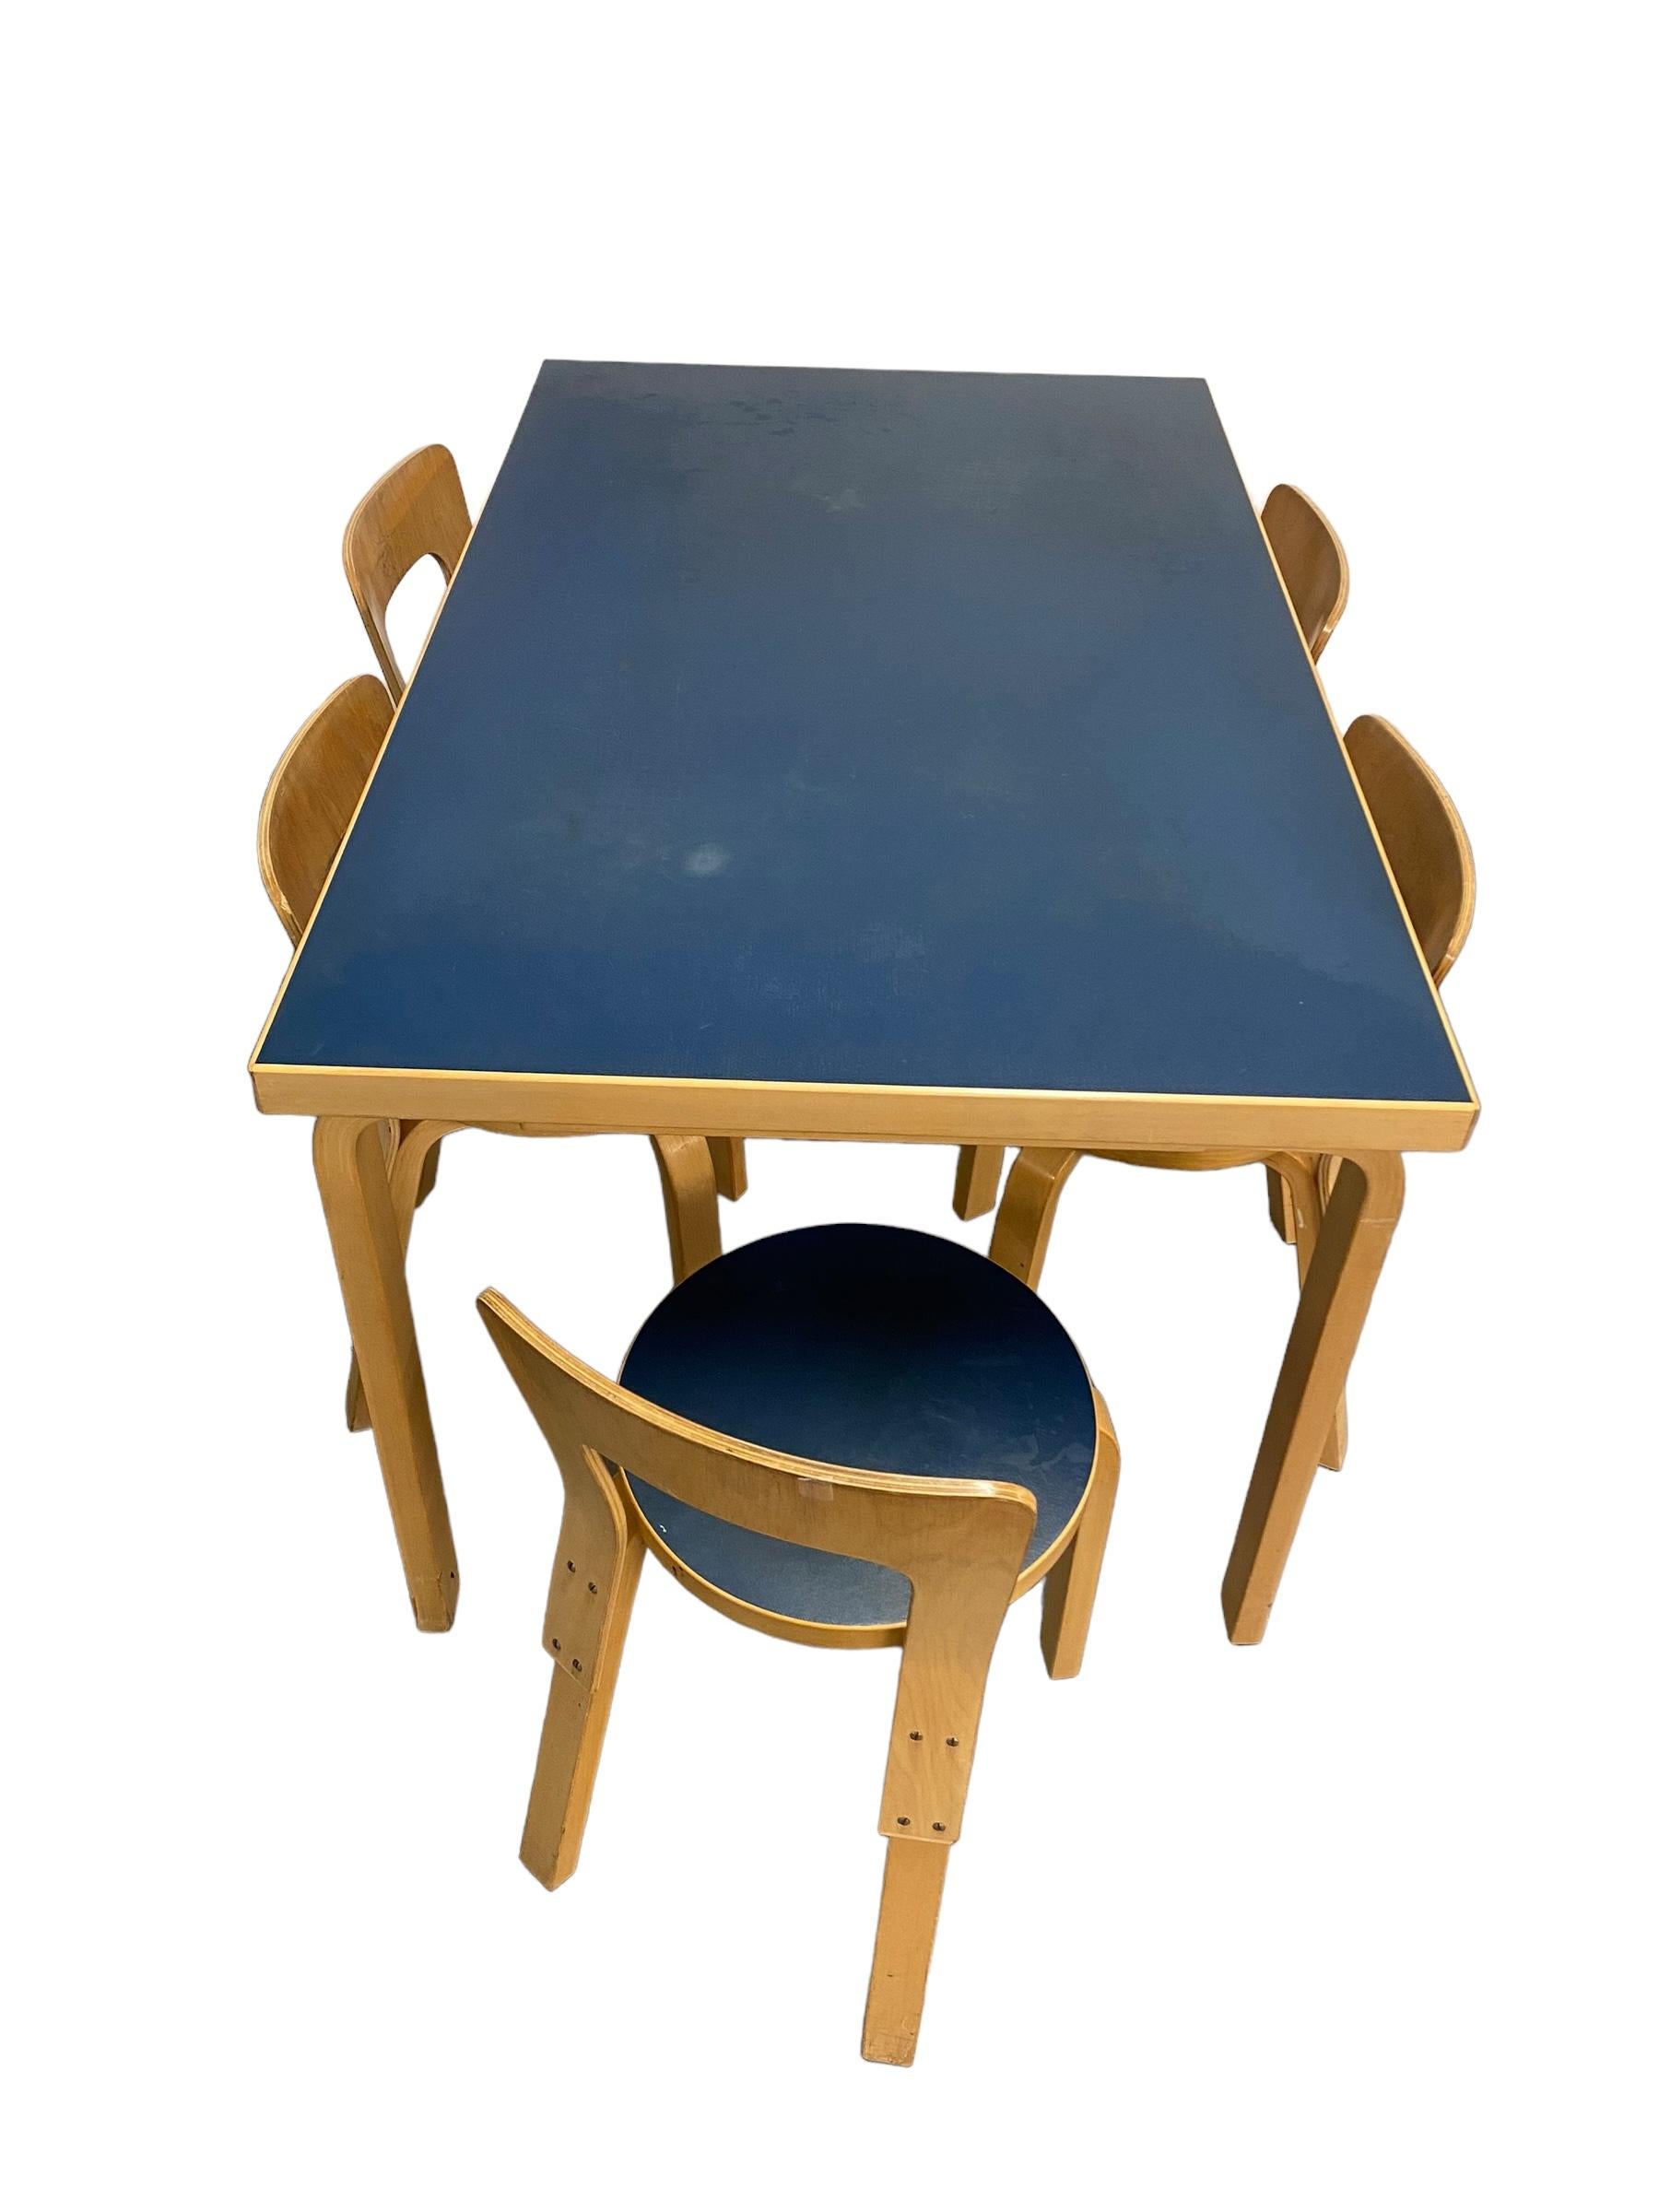 A dining set consisting of a L-leg table and 5 model 65 chairs, designed by Alvar Aalto, manufactured by Huonekalu- Ja Rakennustehdas Oy, and retailed by Artek in Finland. All items are in their completely original condition including the blue